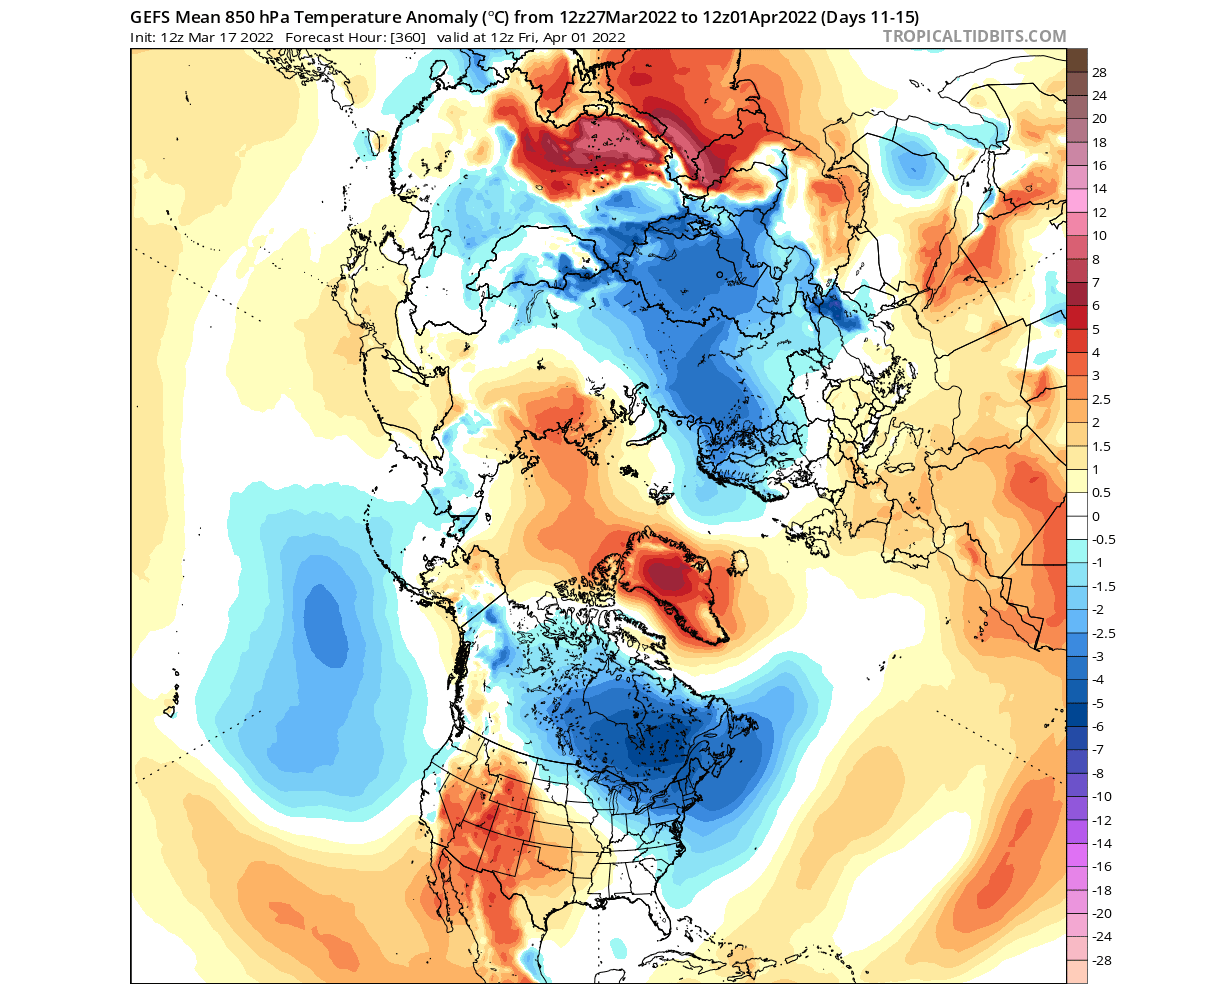 polar-vortex-collapse-warming-forecast-spring-march-end-month-north-hemisphere-temperature-anomaly-weather